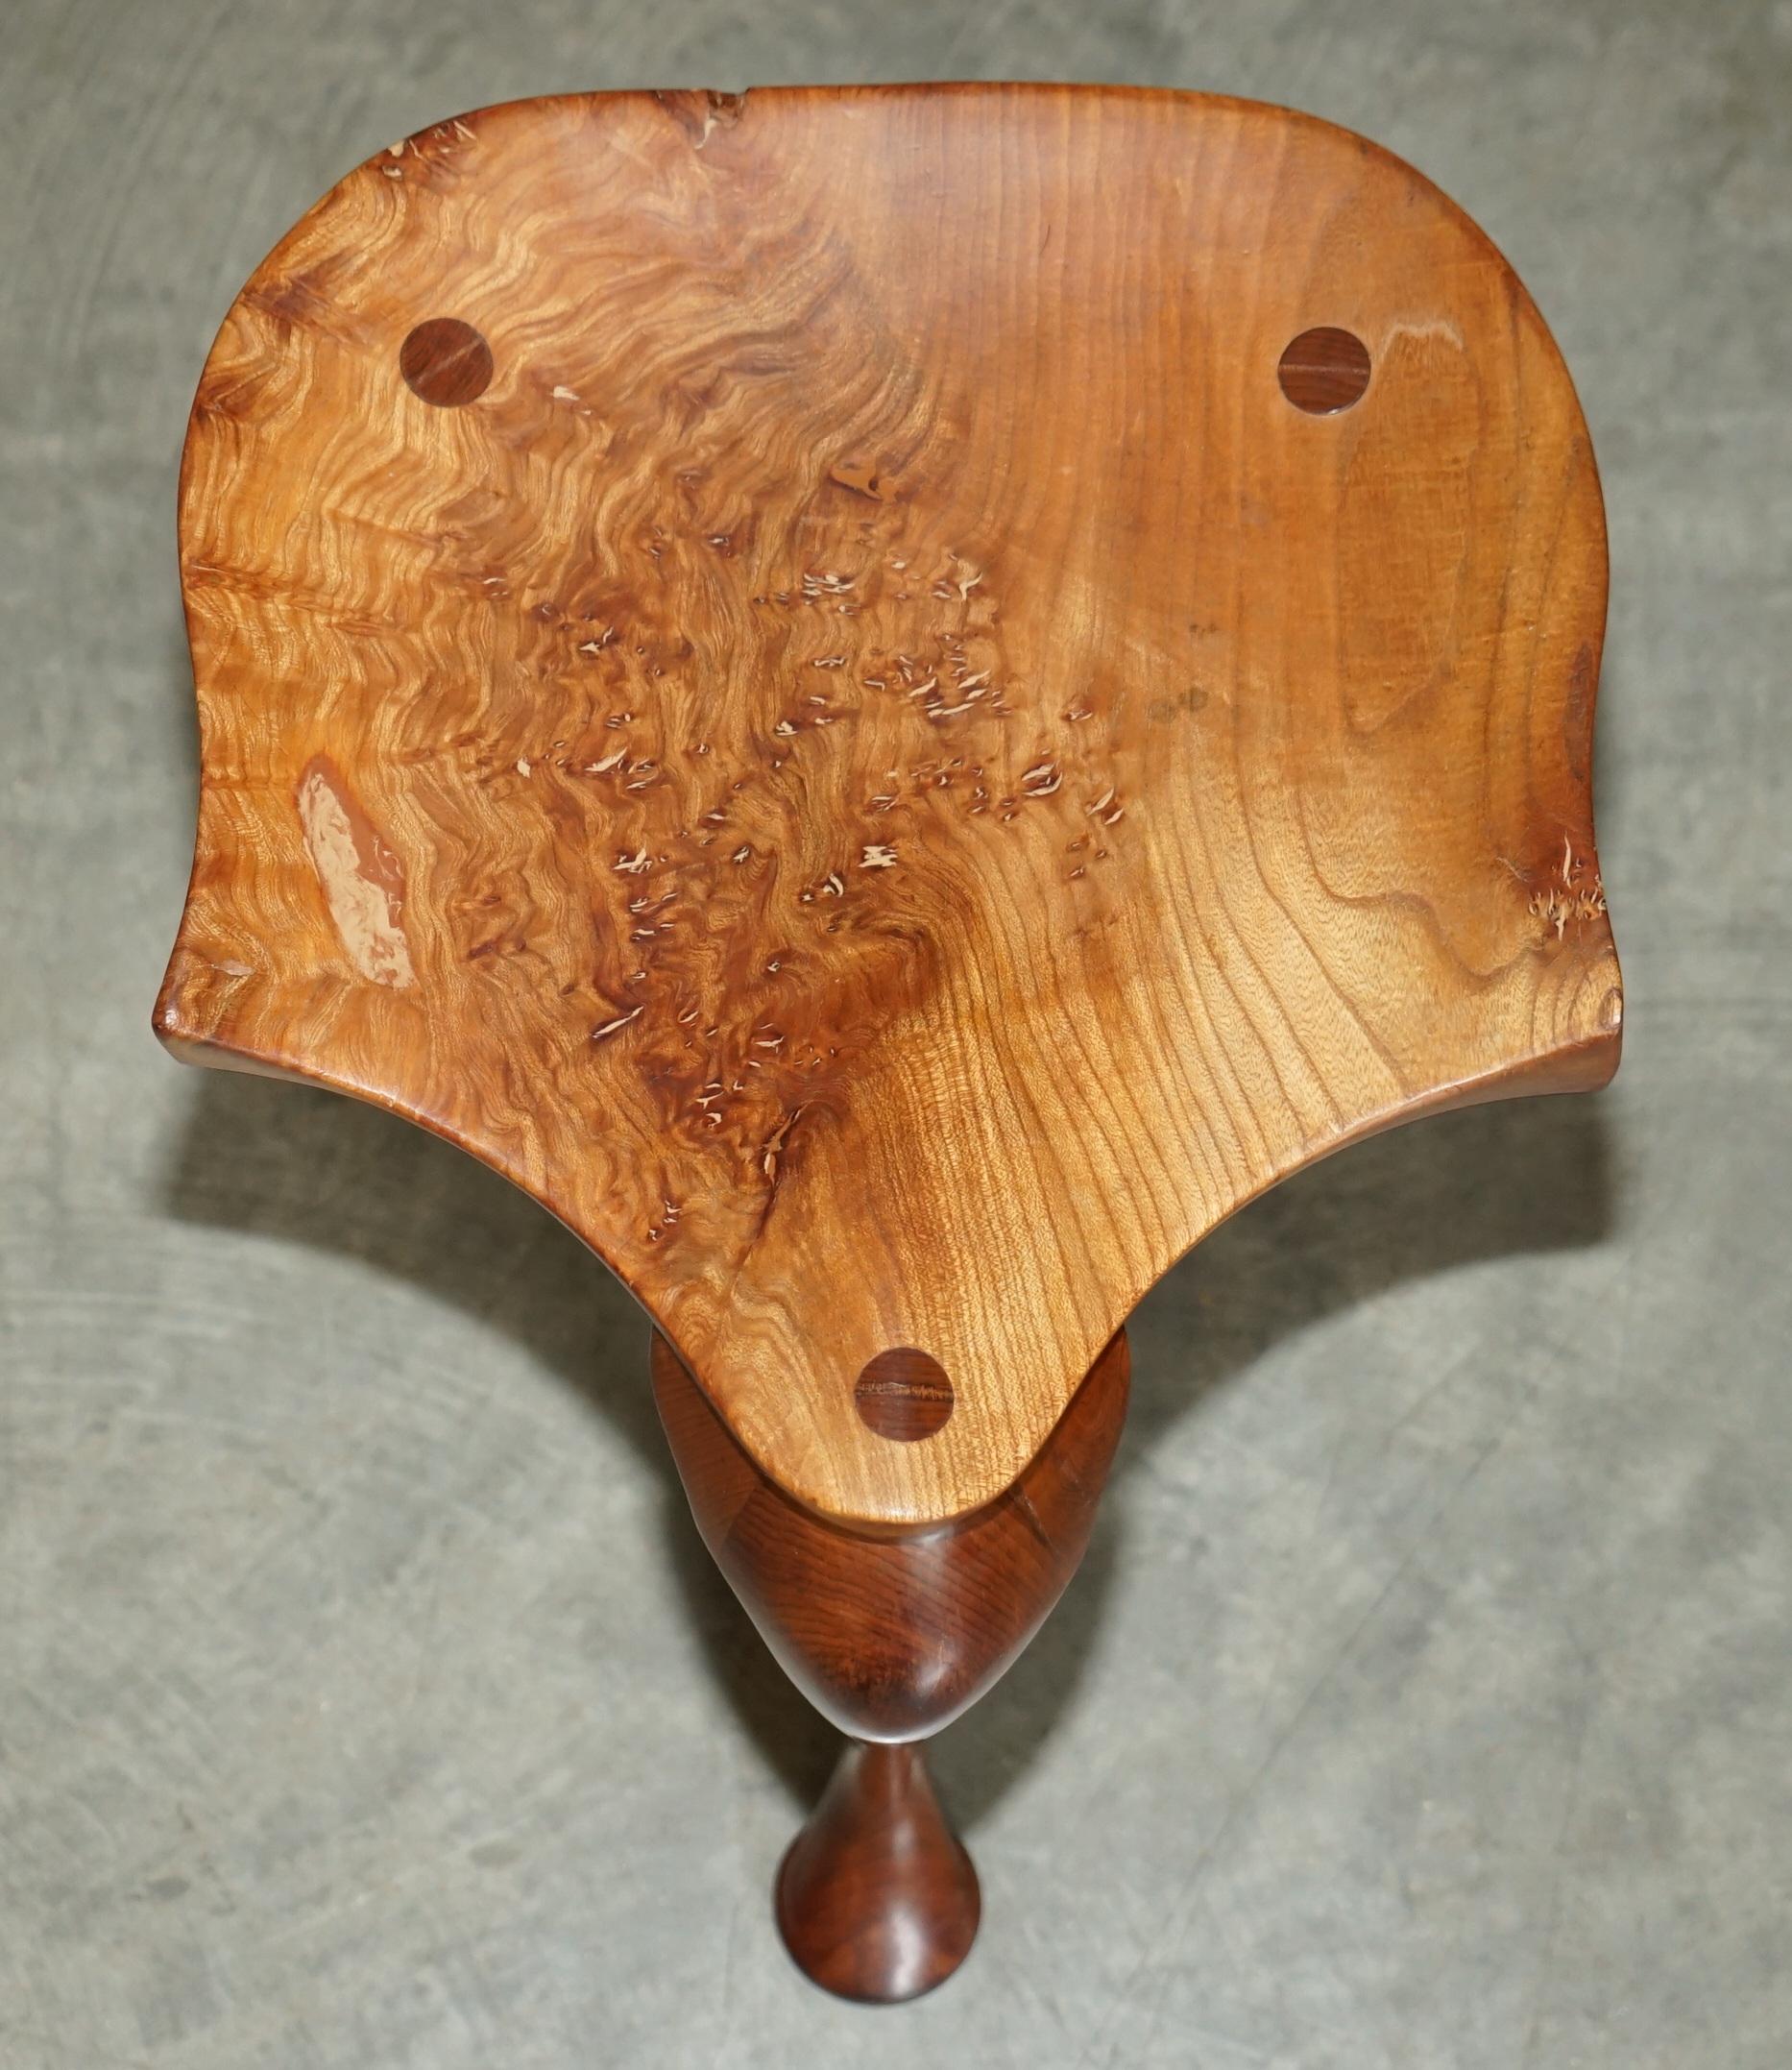 Country Stunning Burr Yew Wood Vintage Three Legged Stool Very Decorative Timber Grain For Sale